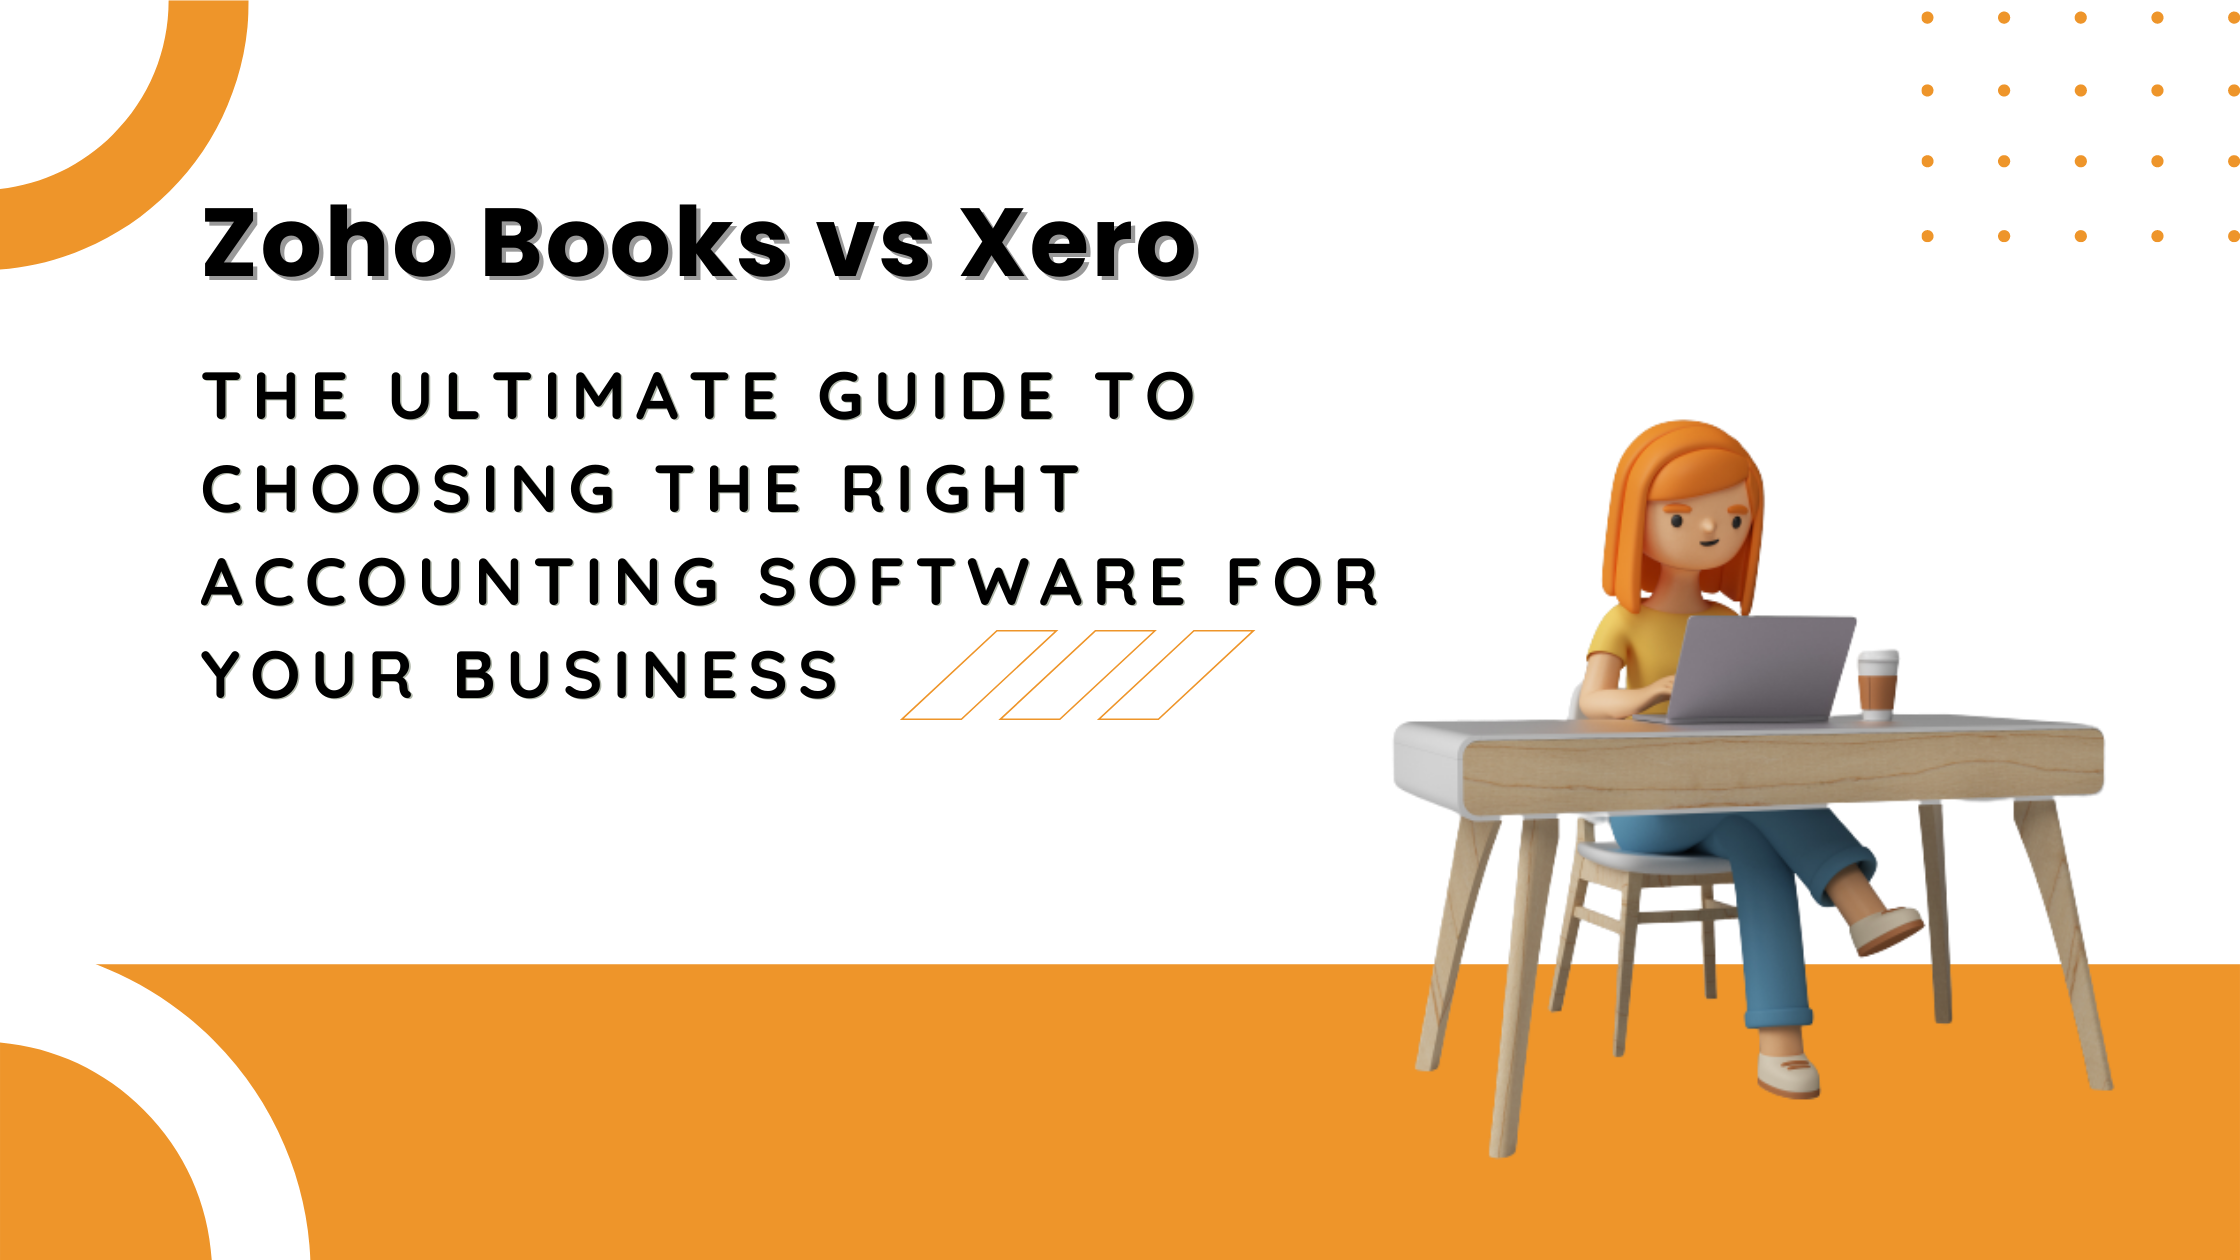 Zoho Books vs Xero: The Ultimate Guide to Choosing the Right Accounting Software for Your Business